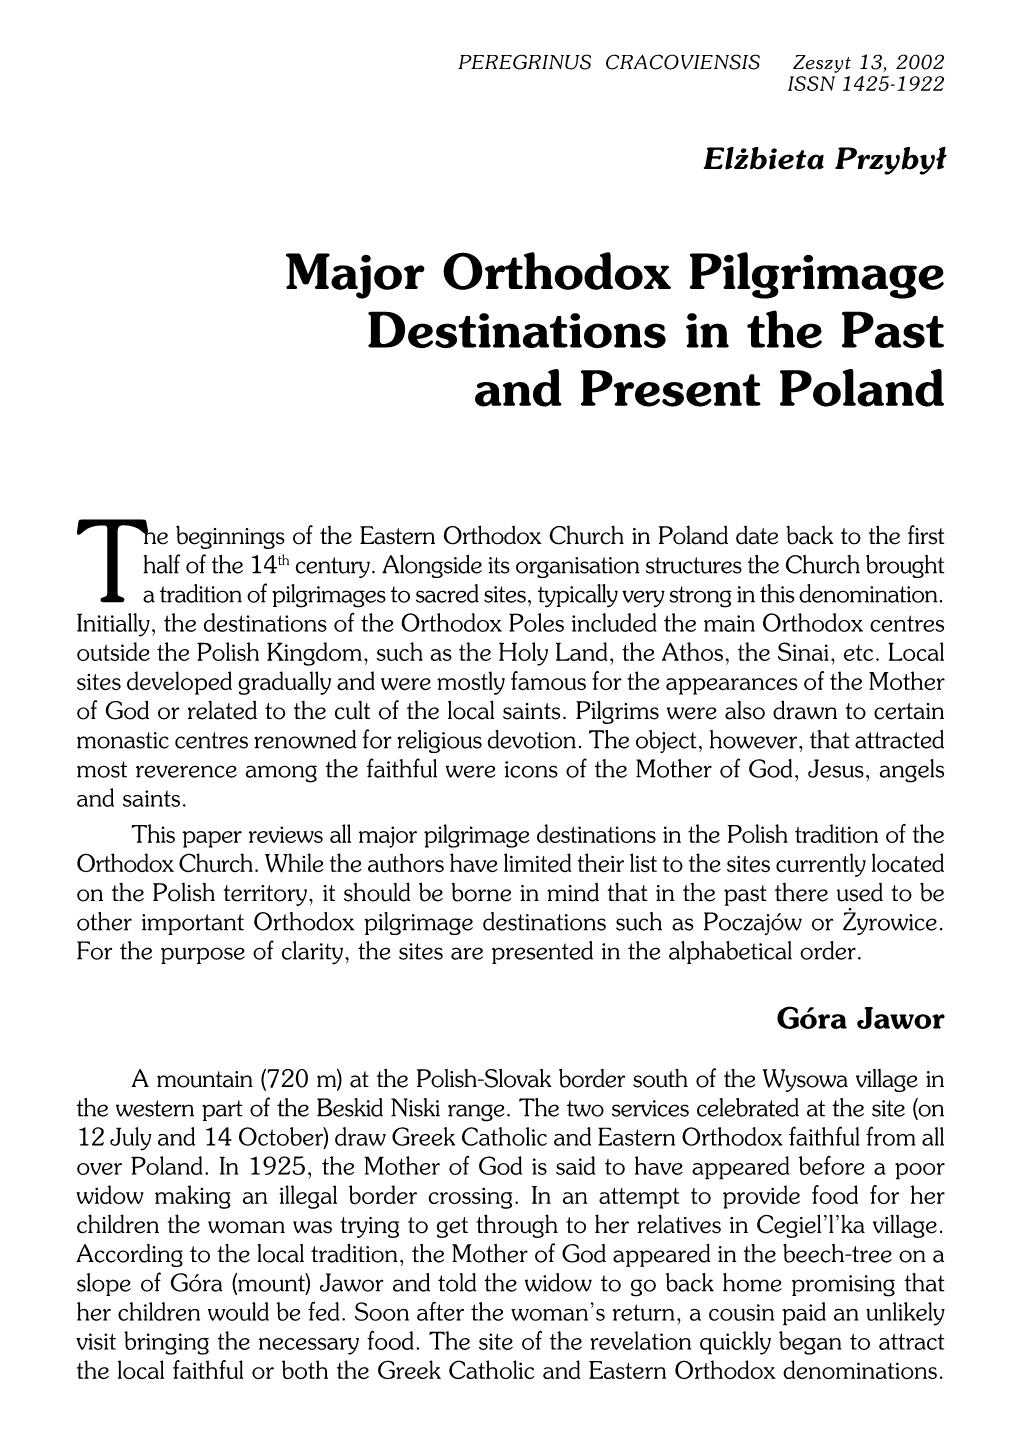 Major Orthodox Pilgrimage Destinations in the Past and Present Poland